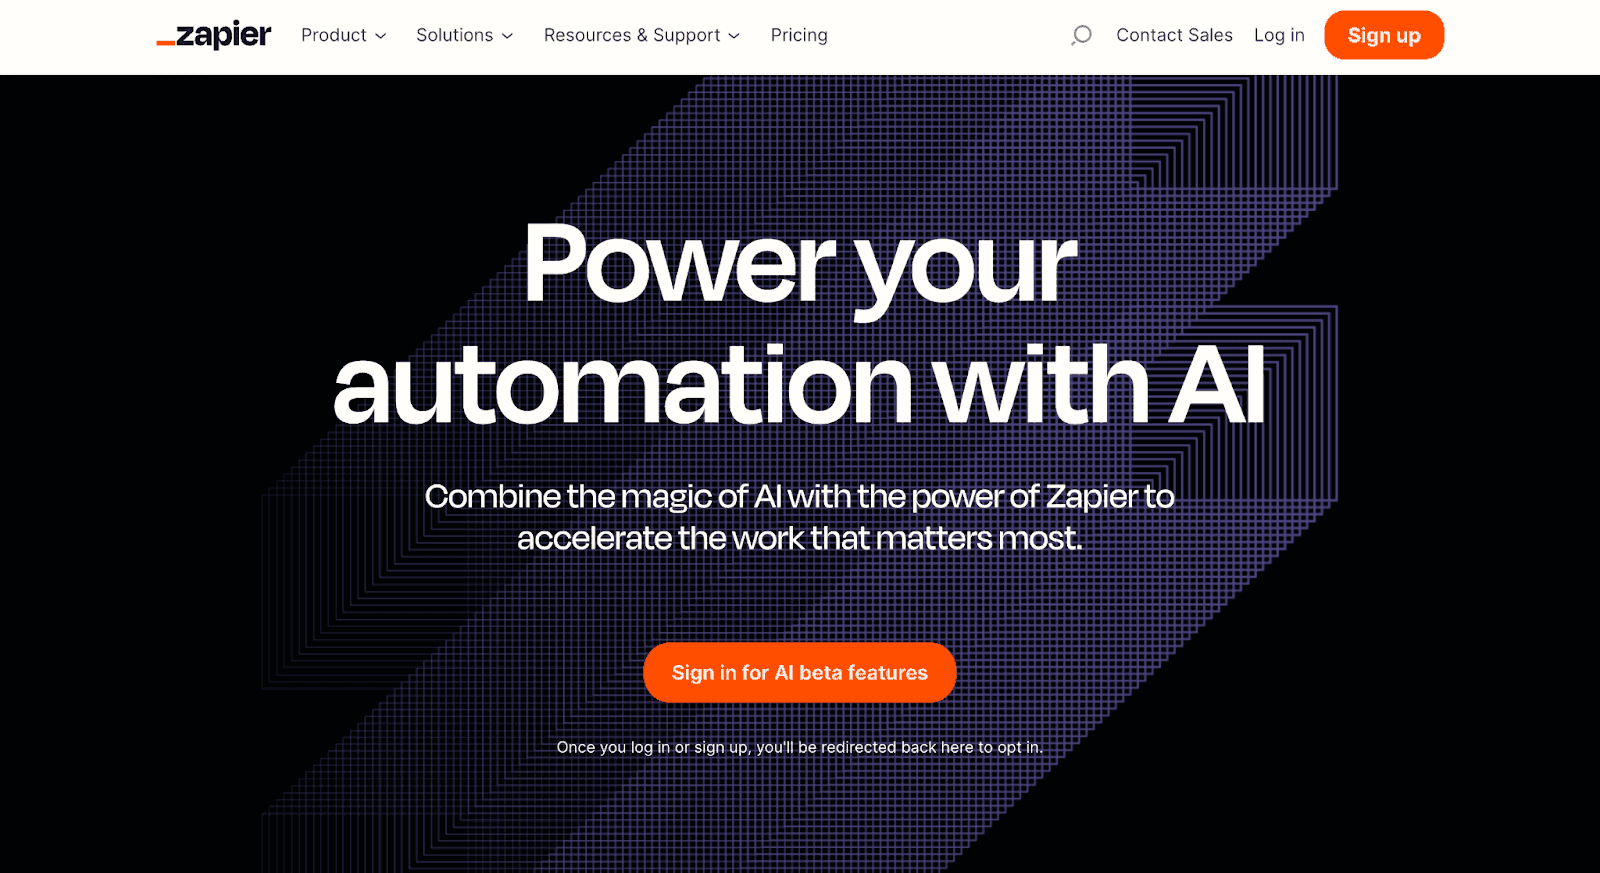 Zapier homepage - Power your automation with AI